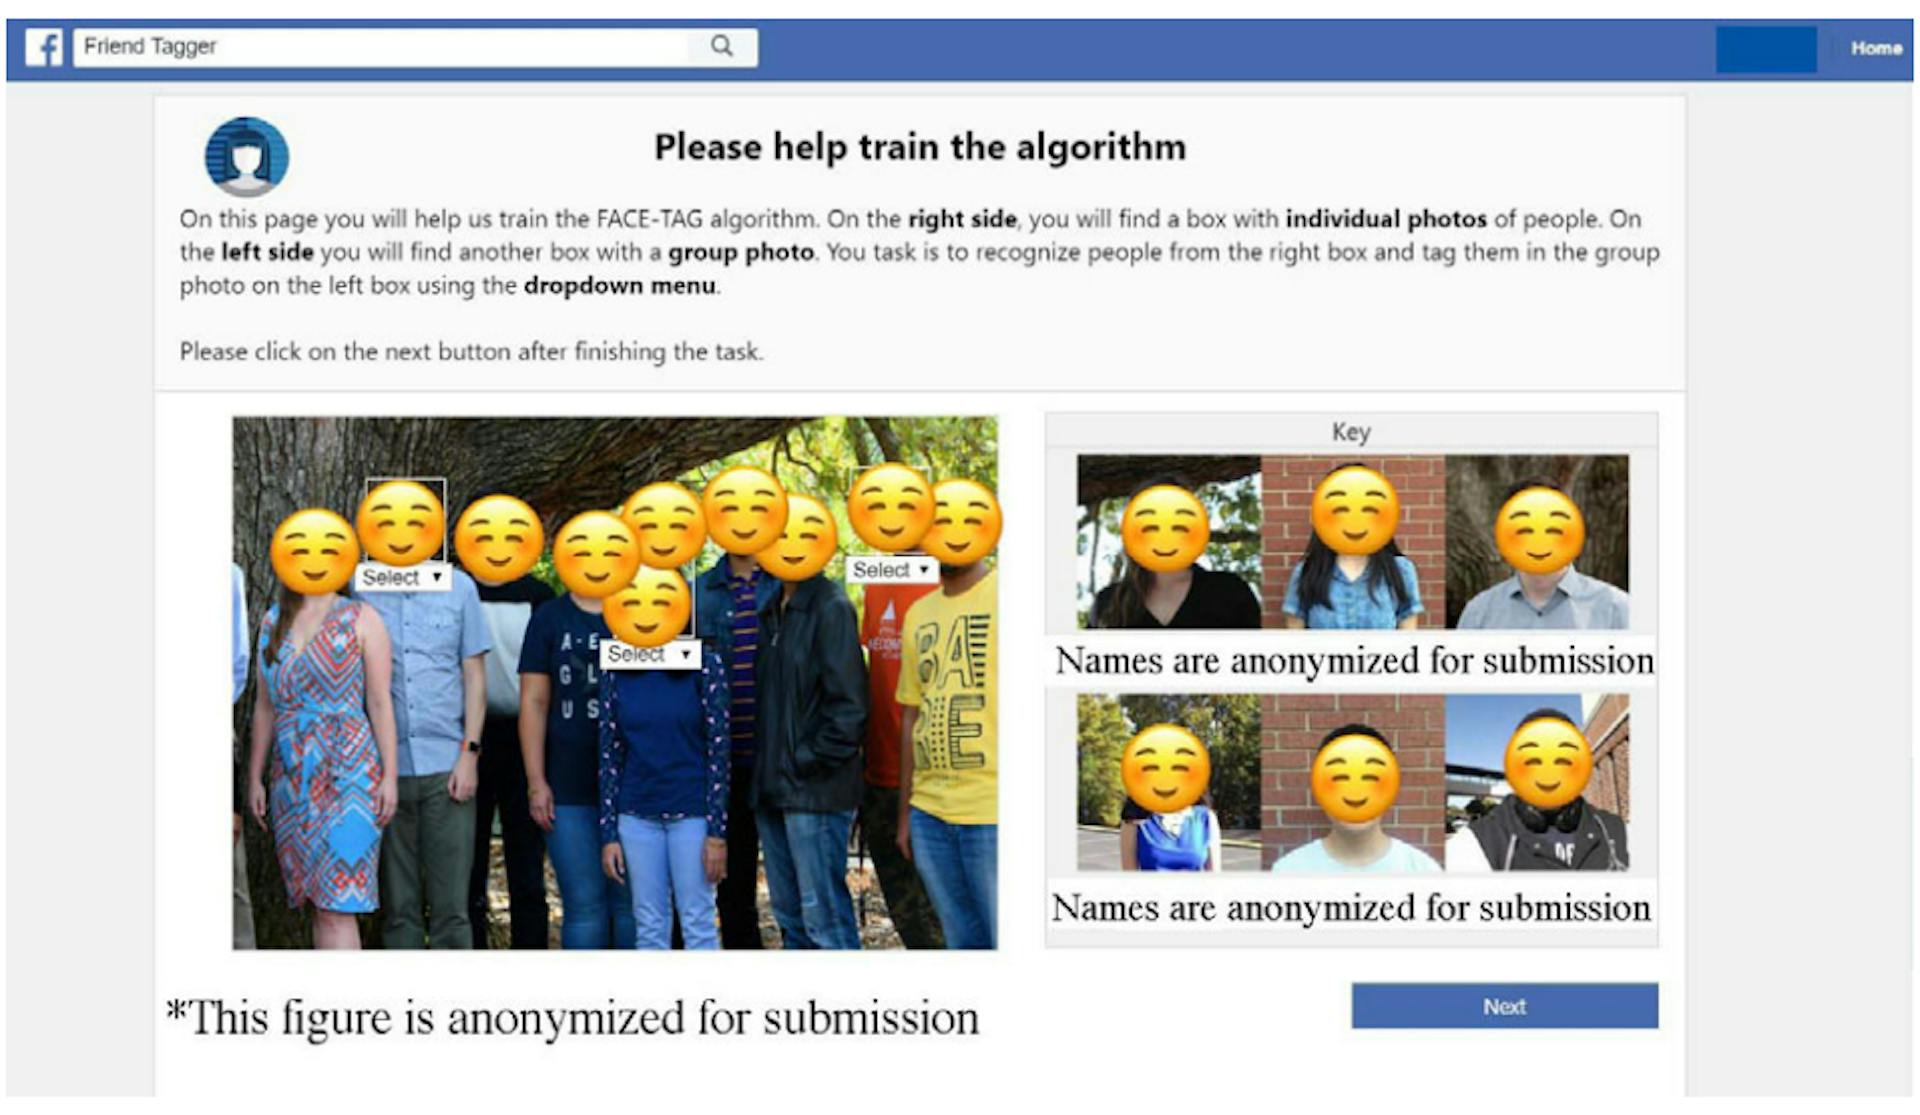 Fig. 3. One of the training pages where participants could tag individuals in the photo on the left side of the screen based on a key on the right side of the screen. They were told that they are “training” the algorithm here. This figure is anonymized. 